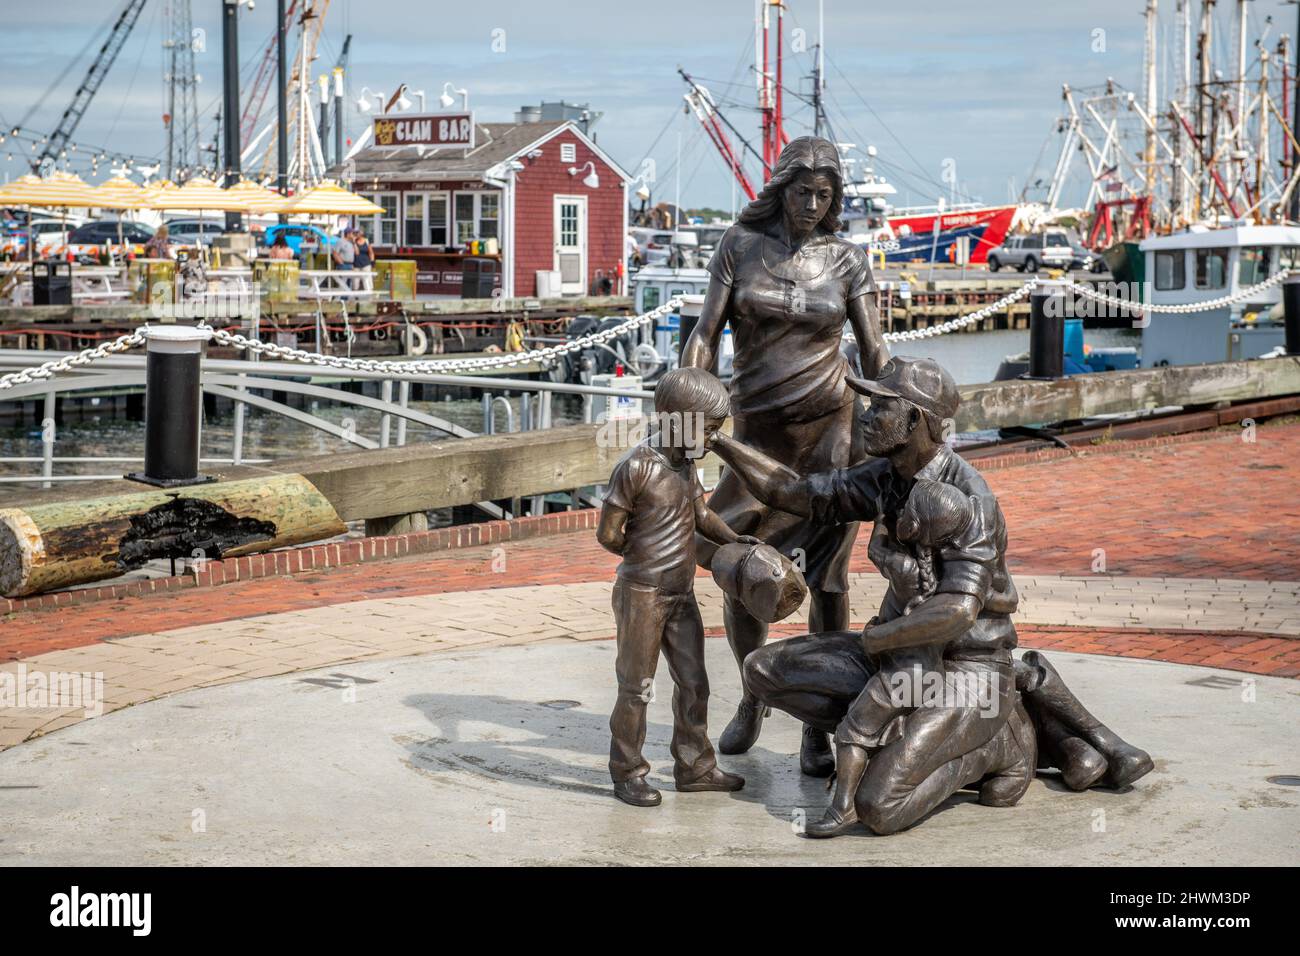 New Bedford Mass, Whaling Center and harbor Stock Photo